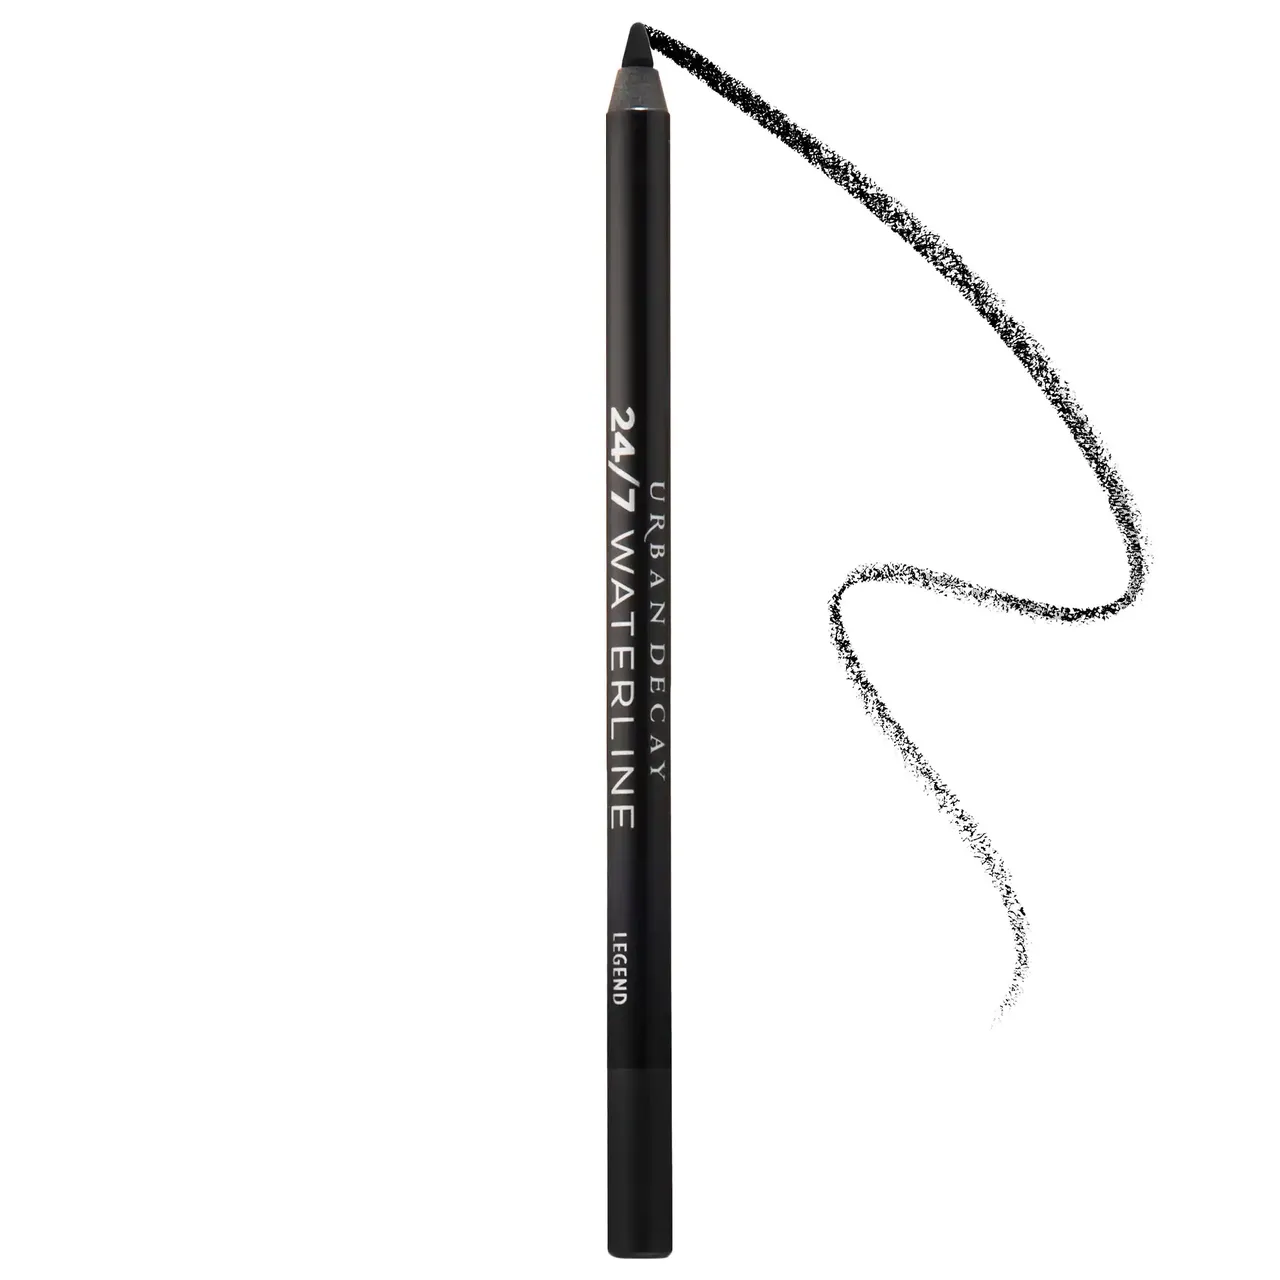 Urban Decay 24/7 Waterline Eye Pencil with swatch on white background